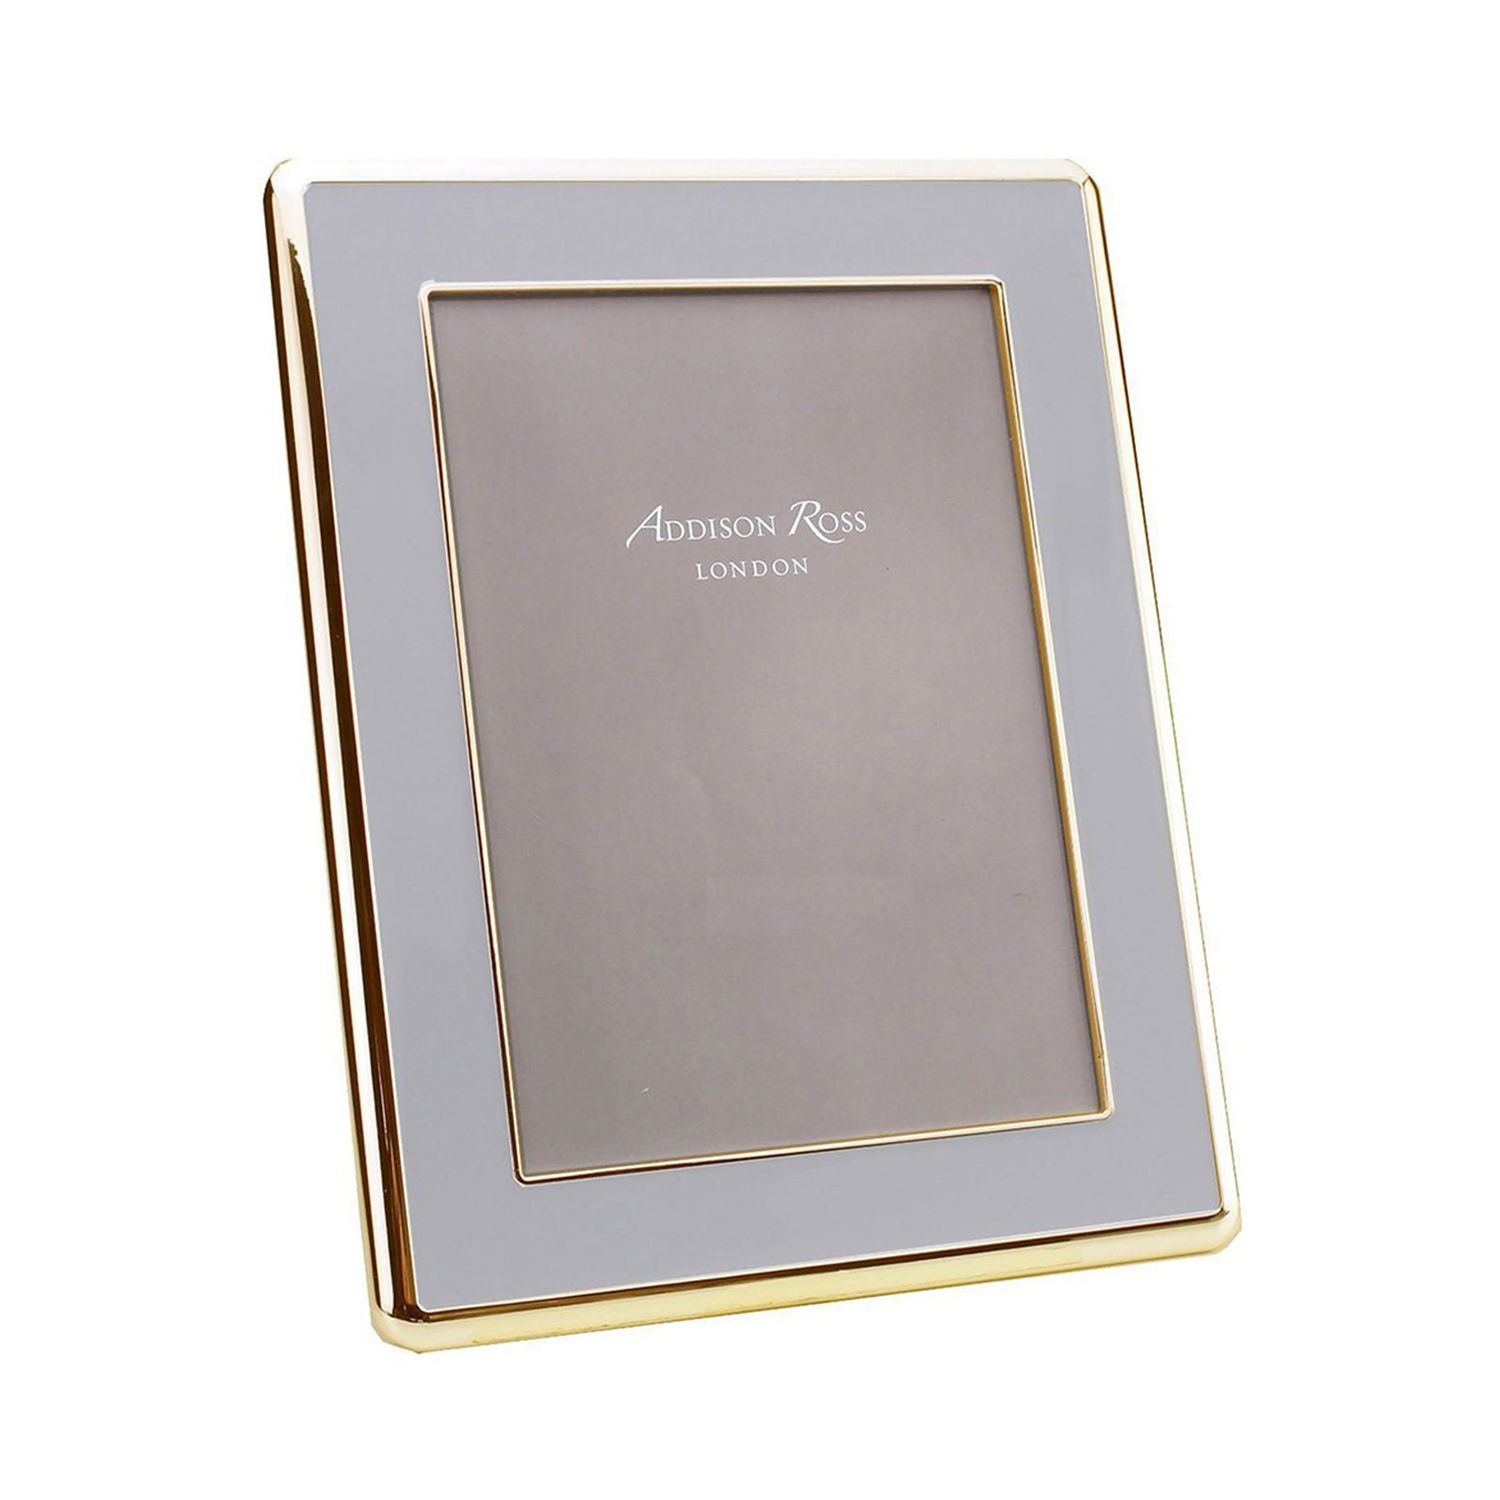 Addison Ross 5 x 5 Inch Picture Frame 30mm Gold &amp; Stone Grey FR6508